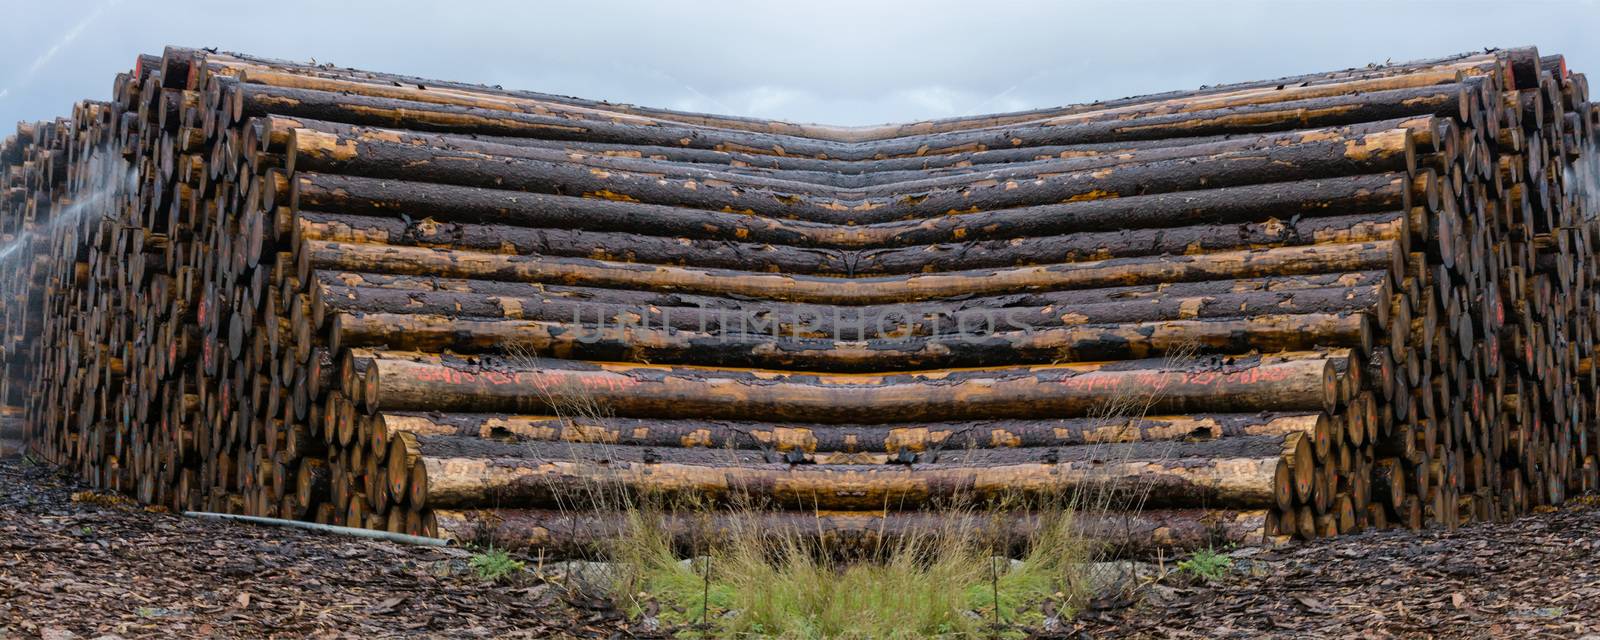 Stacked wood on a wood storage yard by JFsPic